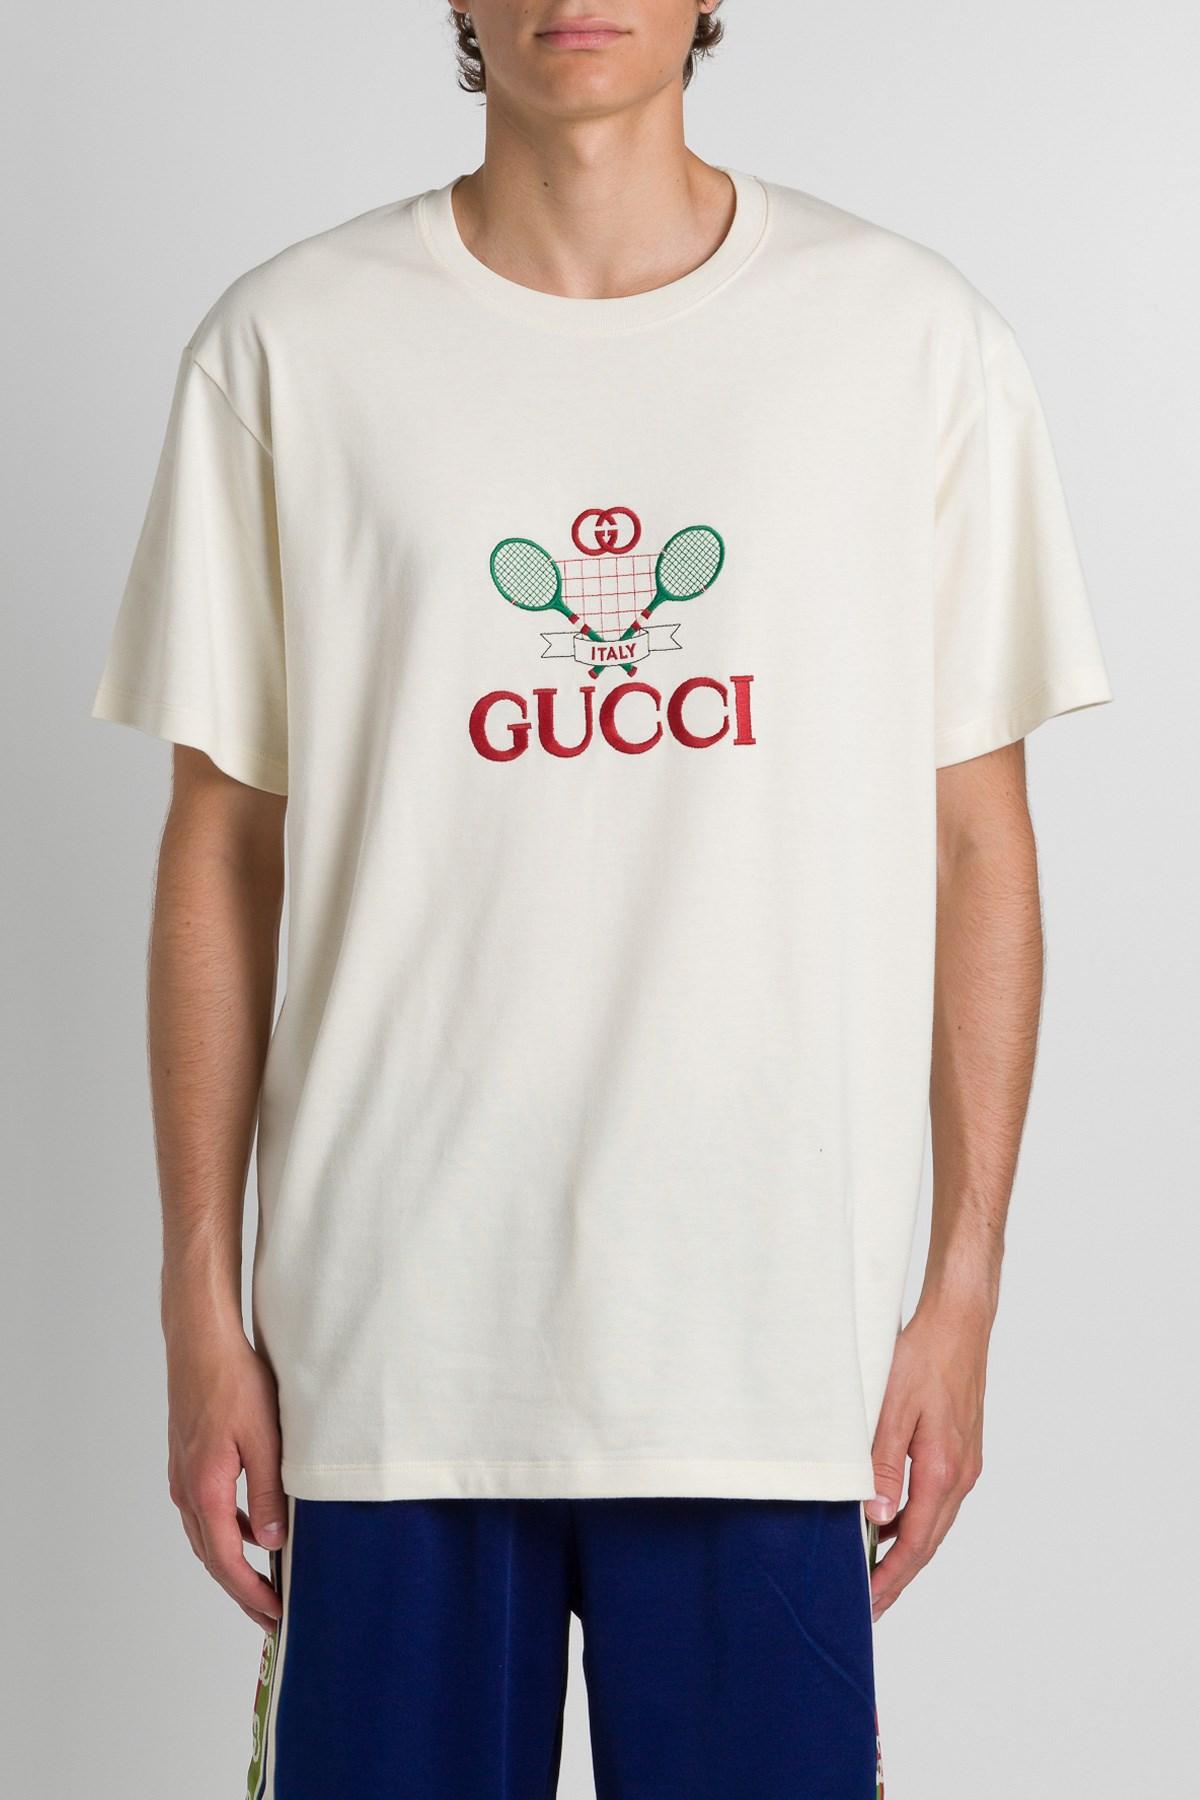 Gucci Gg Tennis Embroidered Cotton T-shirt in White for Men - Lyst